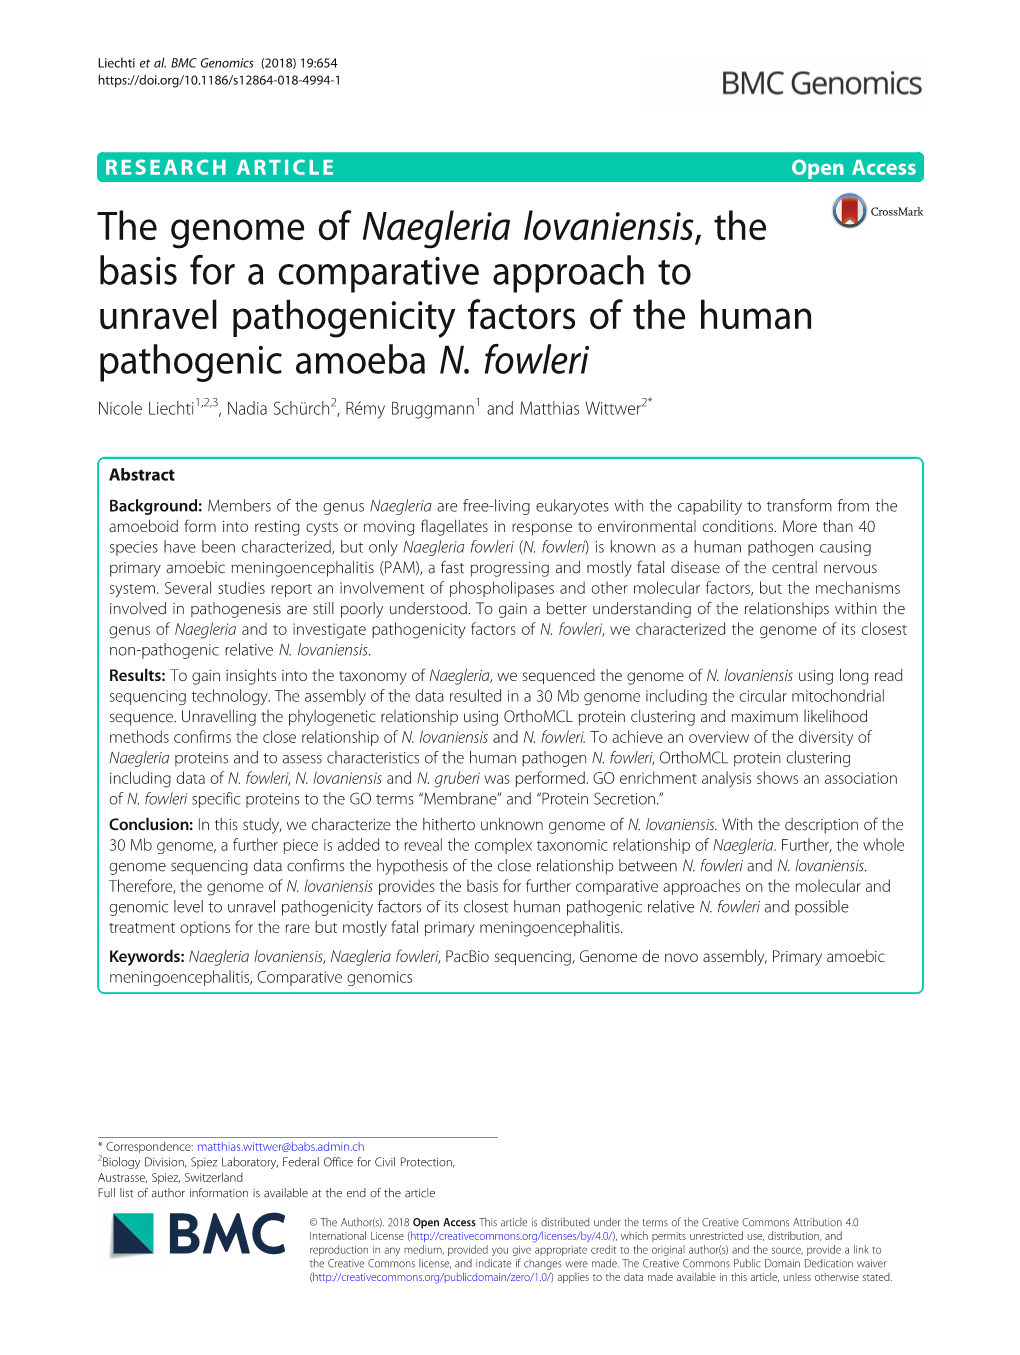 The Genome of Naegleria Lovaniensis, the Basis for a Comparative Approach to Unravel Pathogenicity Factors of the Human Pathogenic Amoeba N